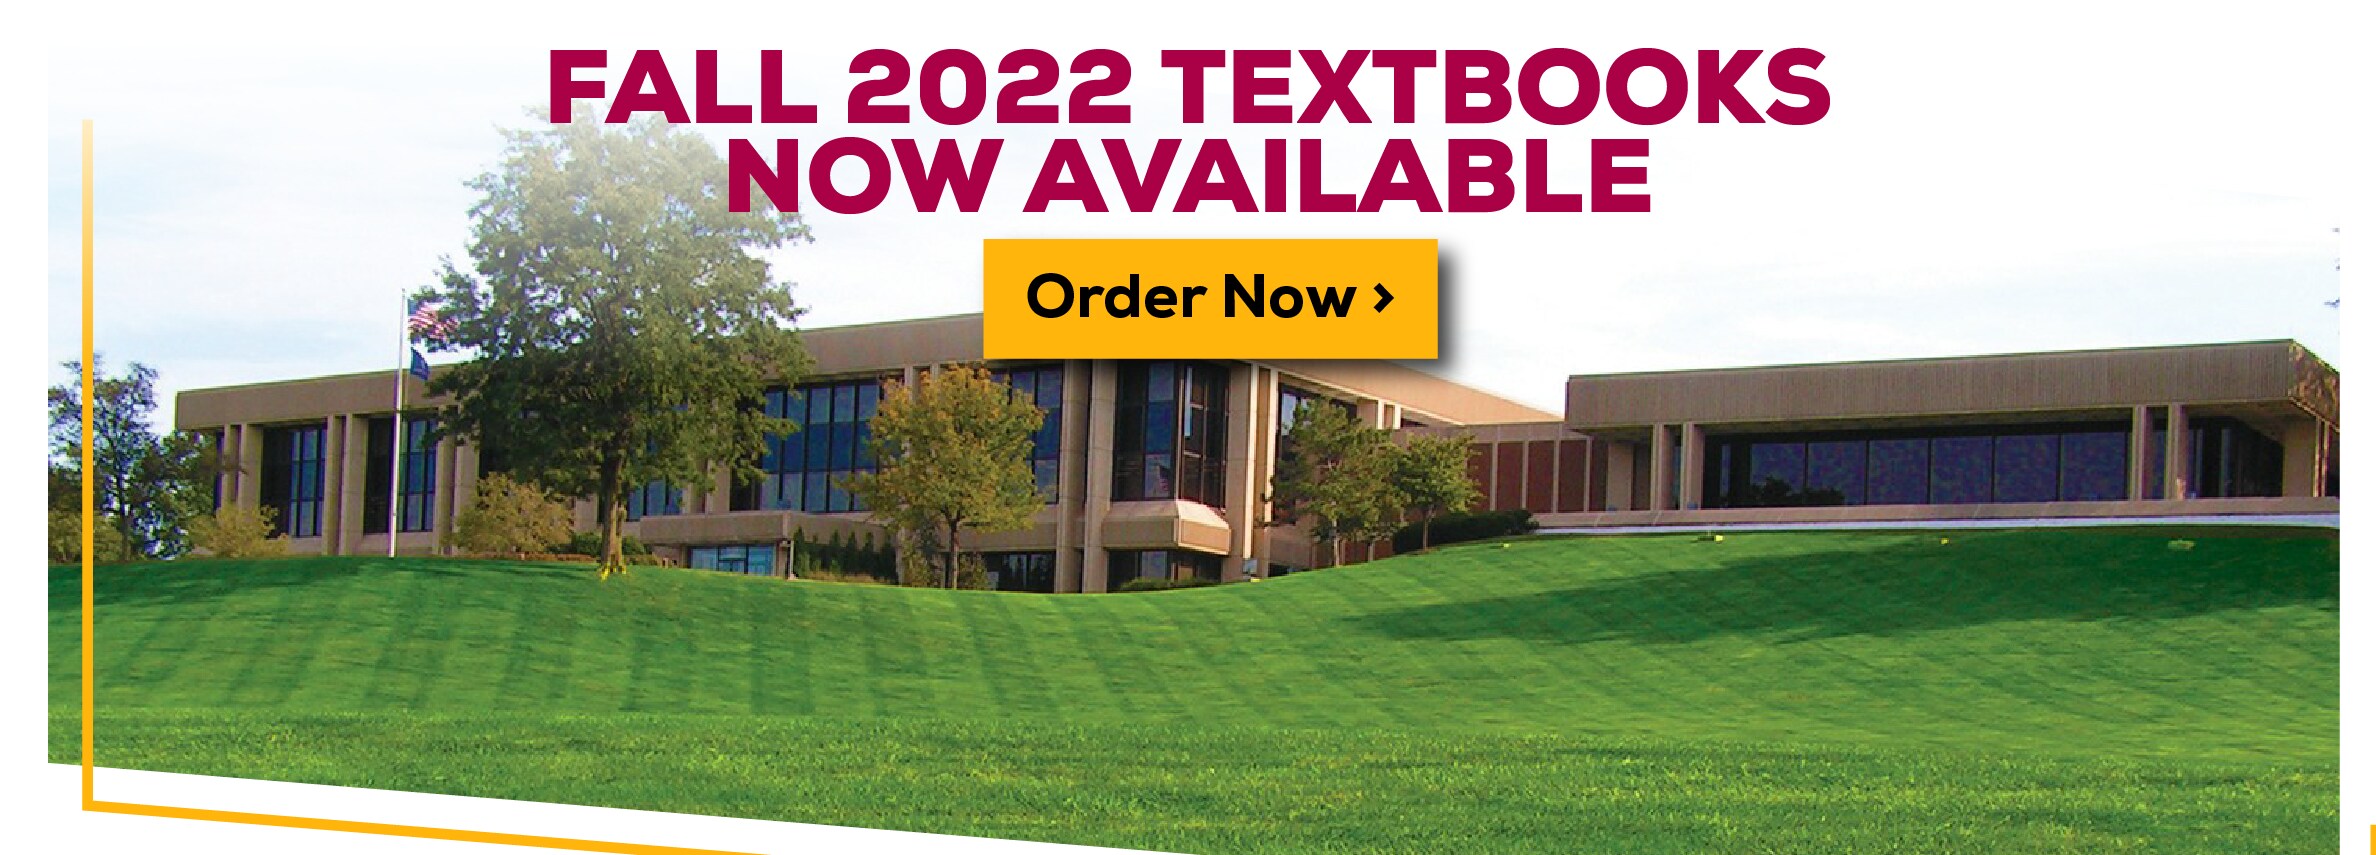 Fall 2022 Textbooks Now Available. Order Now.